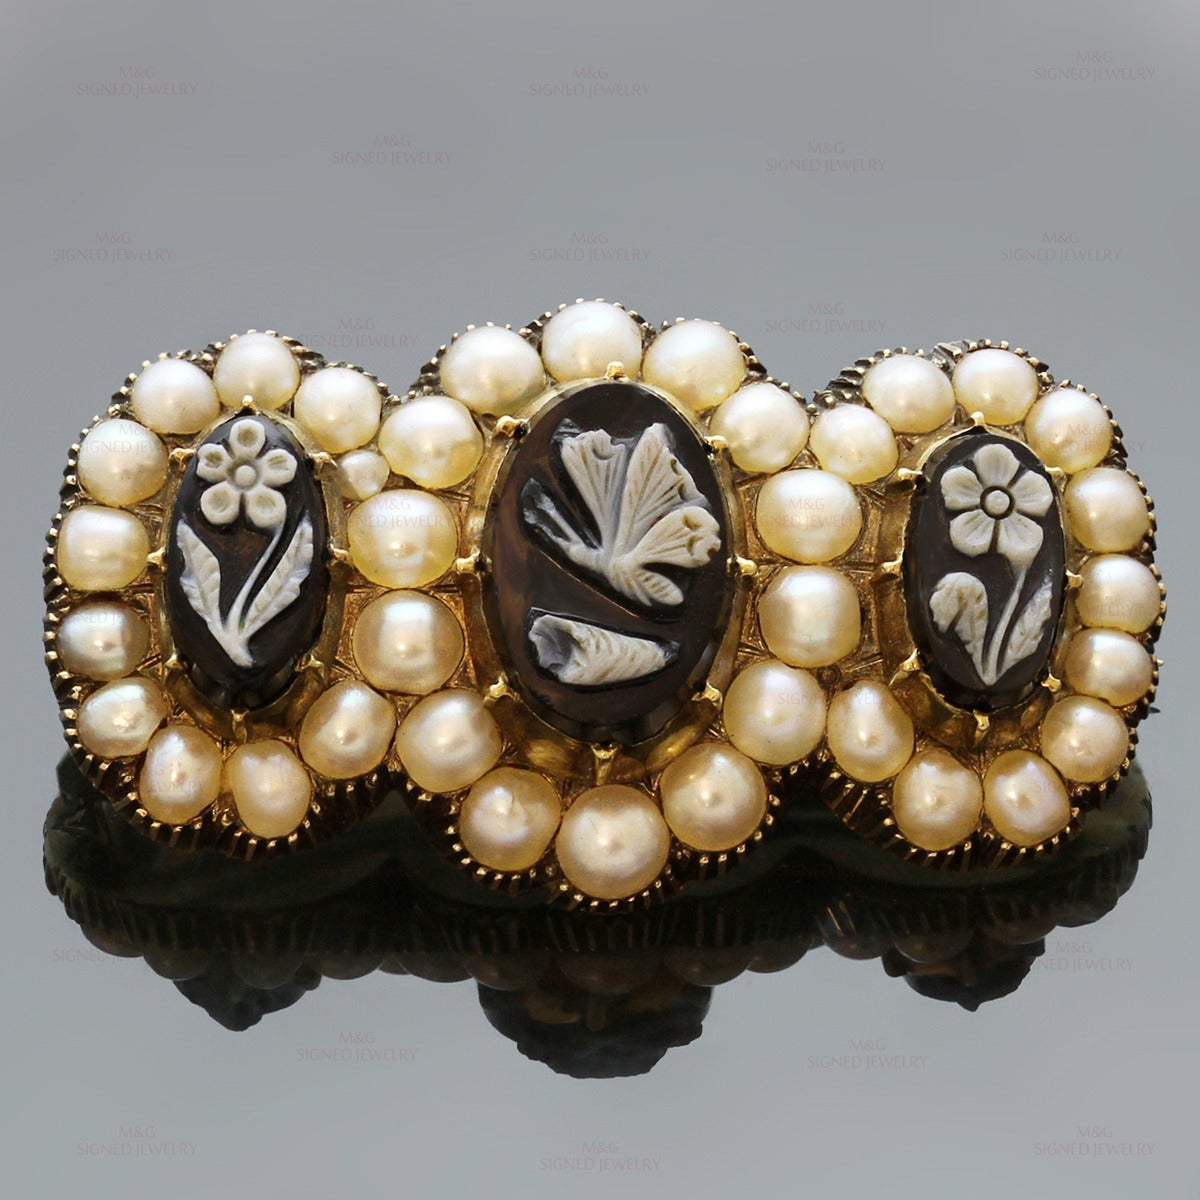 This exquisite hand-made antique circa 1855 brooch is made in 14k yellow gold and set with three black oval agate stones decorated with a butterfly and floral cameo motifs and encircled with saltwater cultured pearls. Engraved in the back 'To my